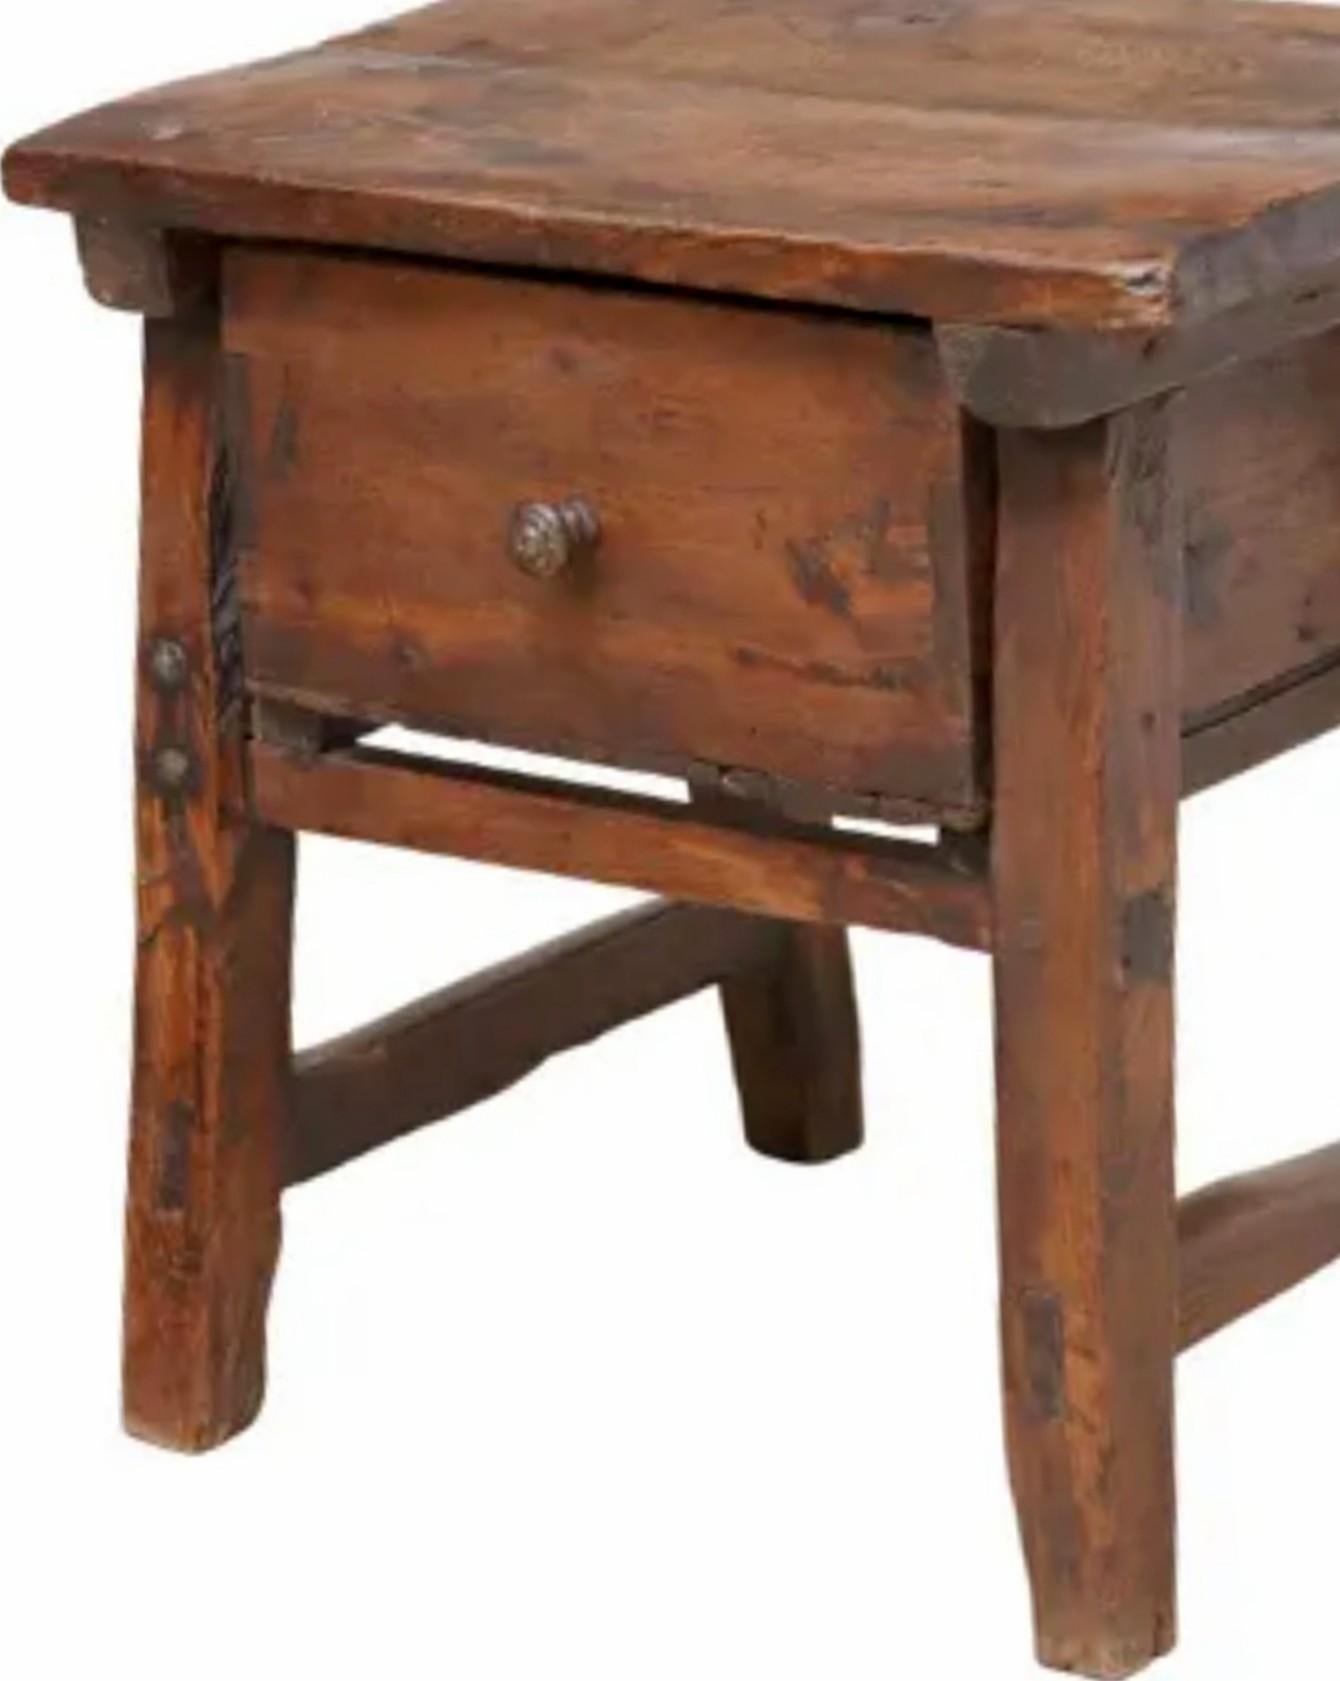 Chamfered Rustic 18th Century Spanish Baroque Style Walnut End Table Nightstand